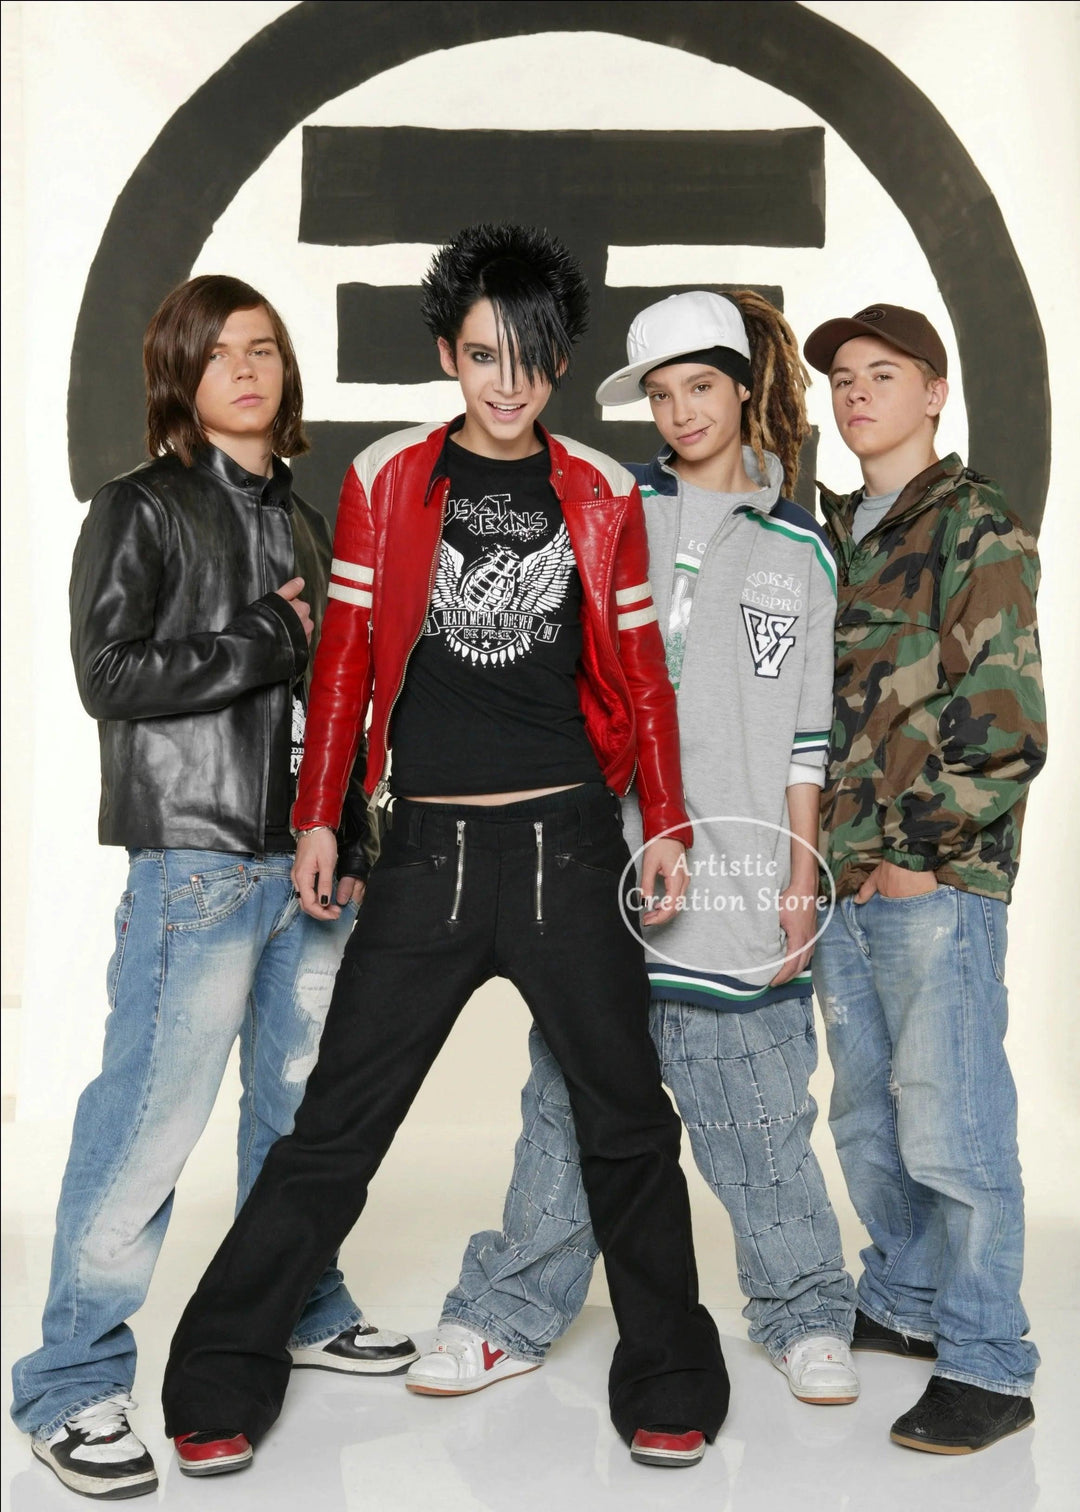 Tokio Hotel Music Posters - German Band Wall Art - Home Decor - Brand My Case